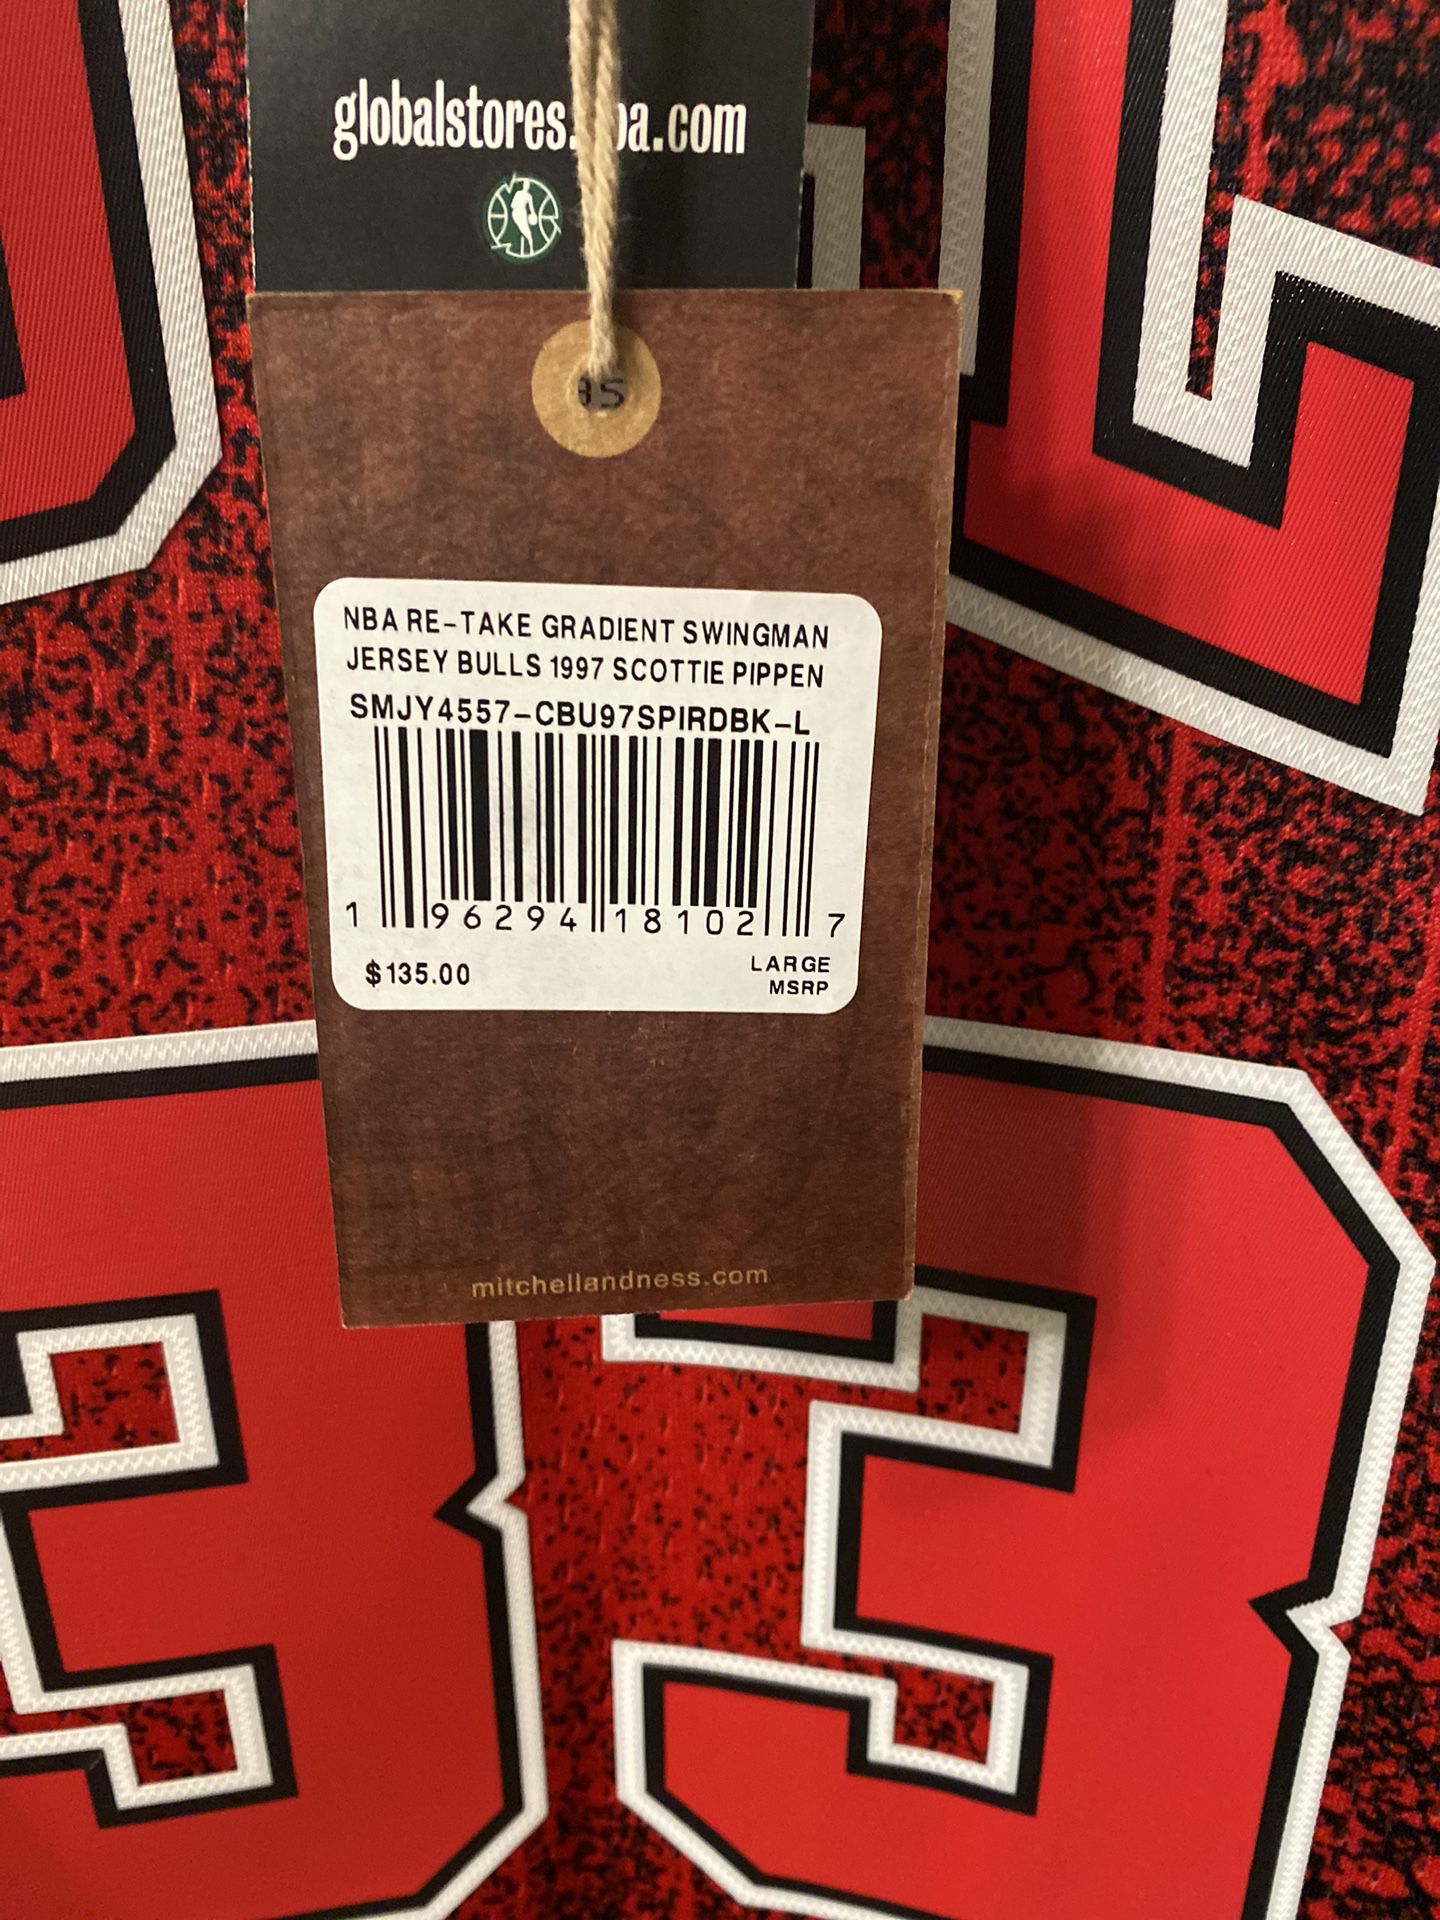 Scottie Pippen Bulls Jersey Addidas Hardwood Classic for Sale in Queens, NY  - OfferUp